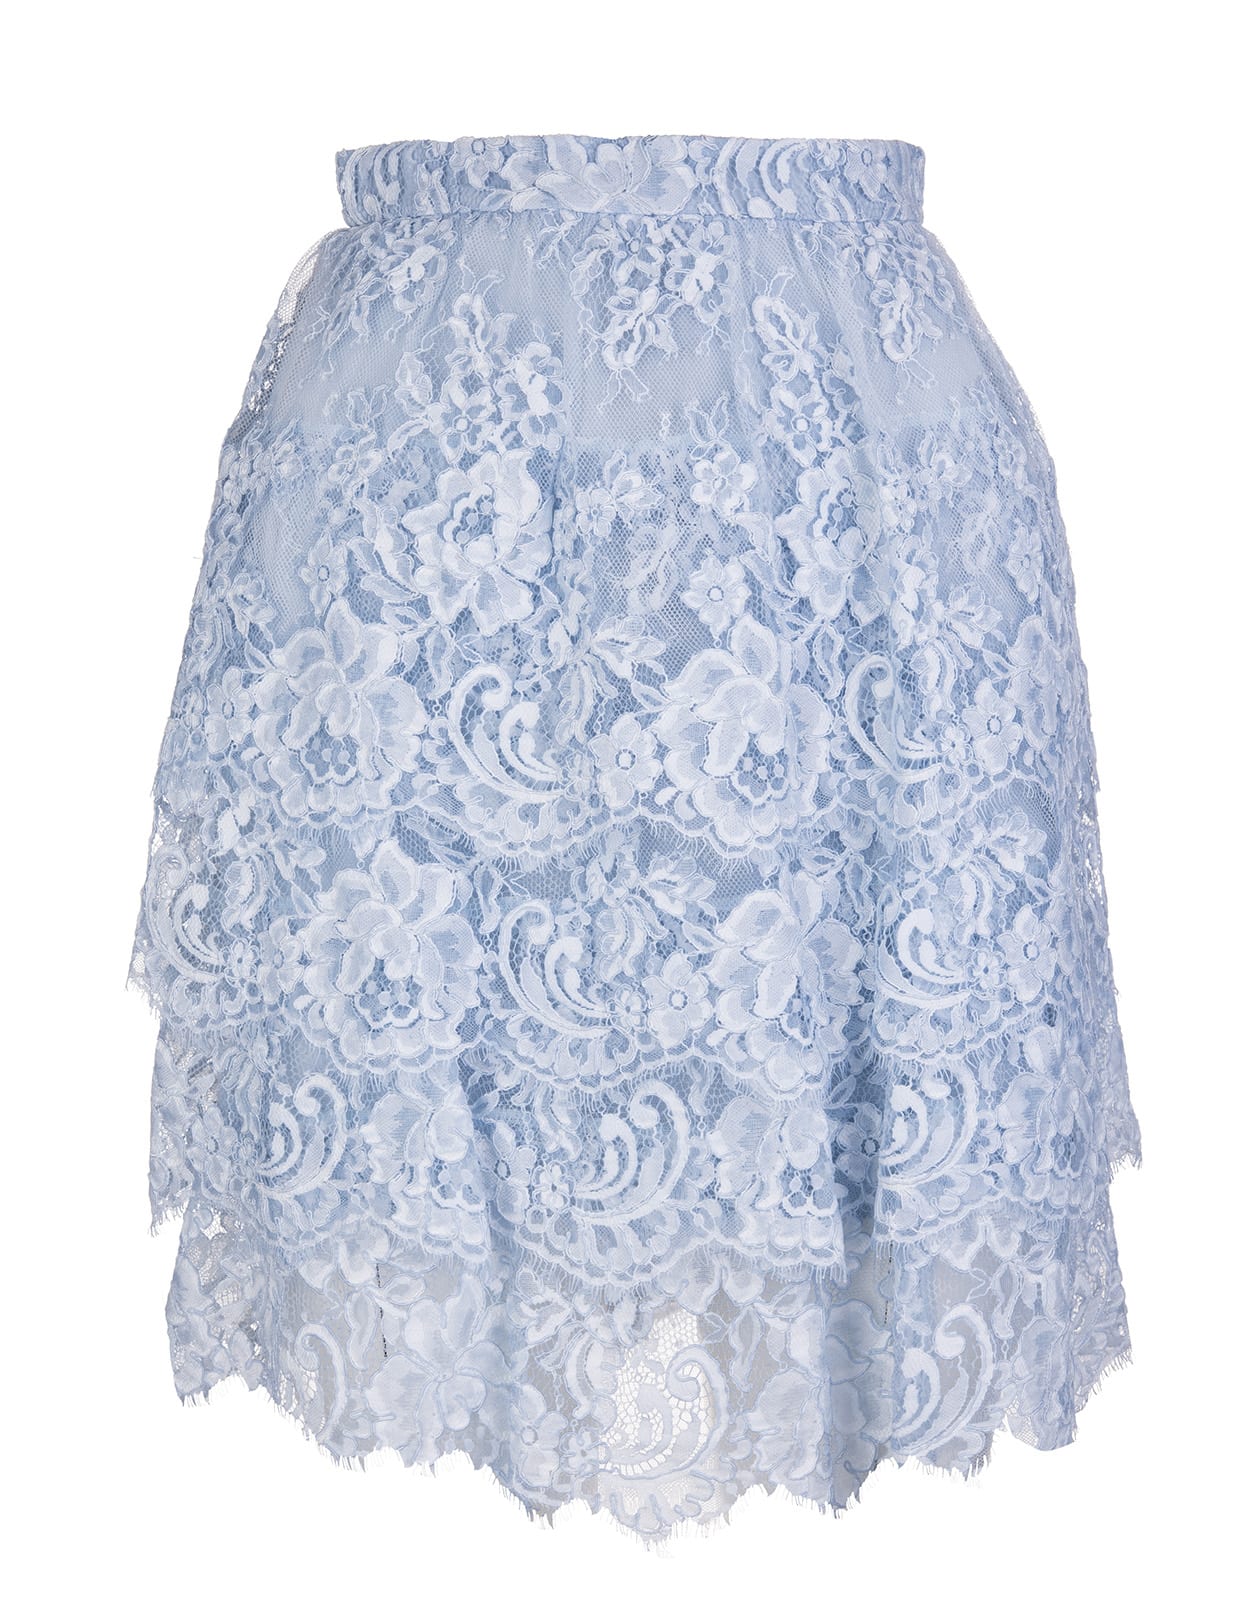 Ermanno Scervino Short Skirt With Flounces In Light Blue Lace